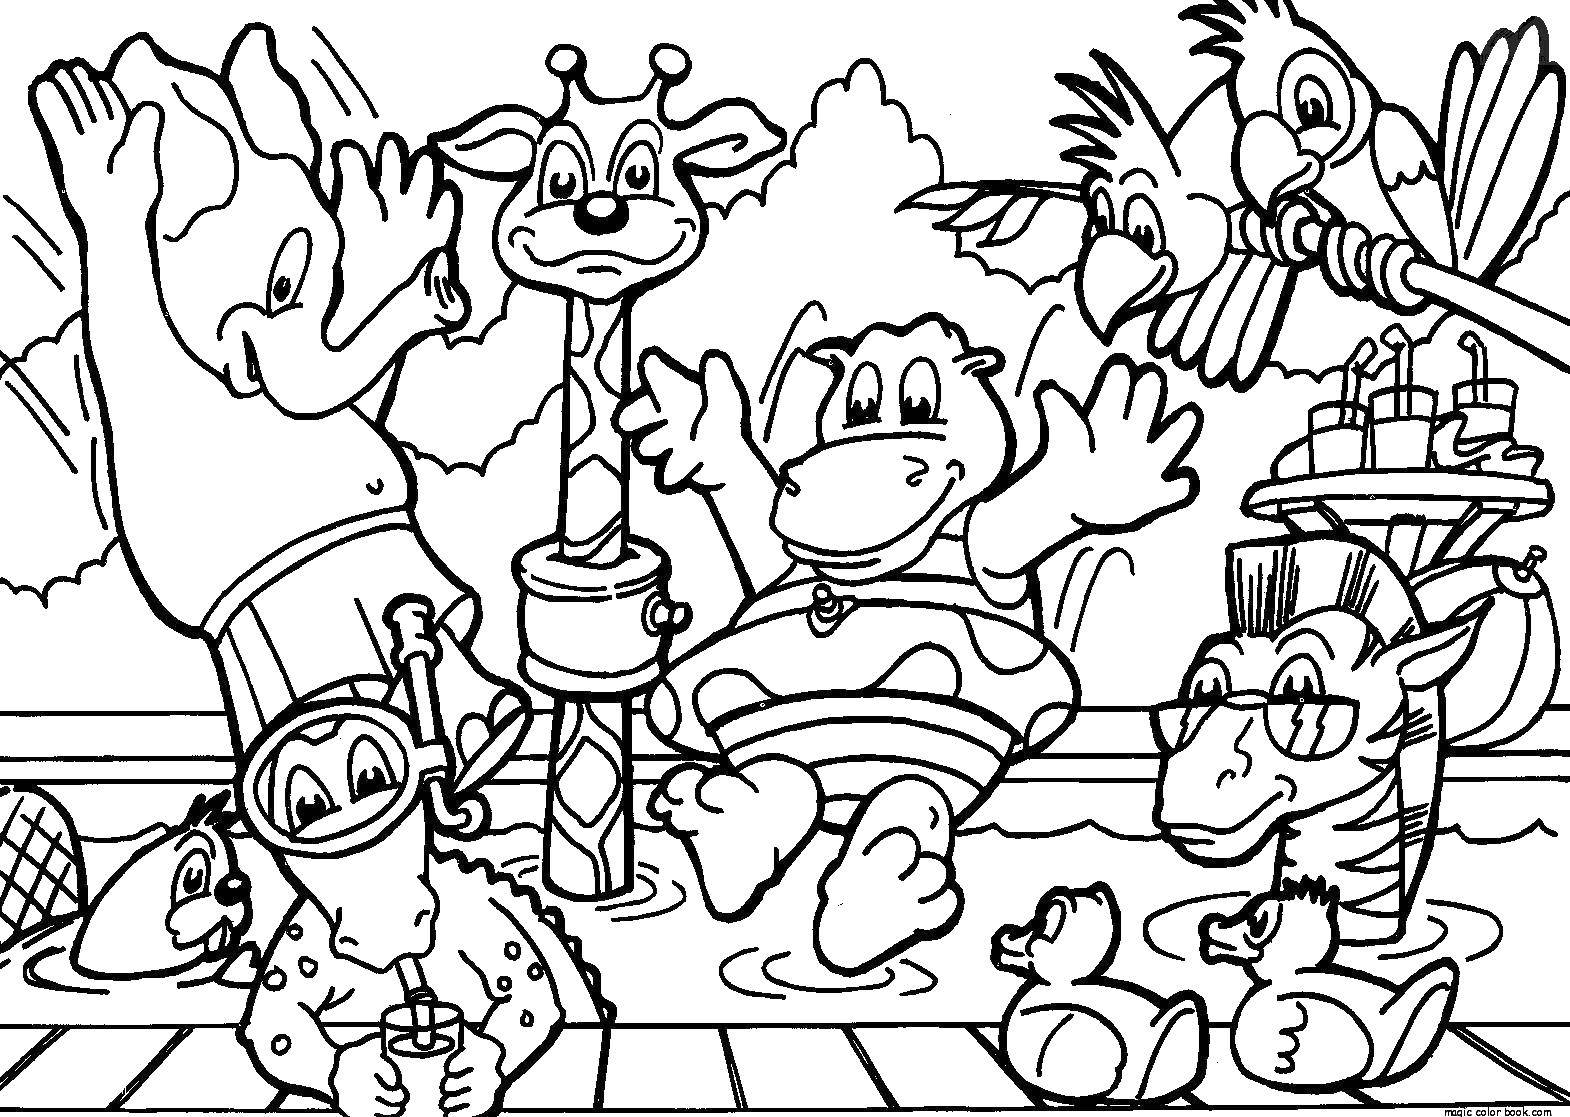 Online coloring pages the coloring the animals swim in the pool animals